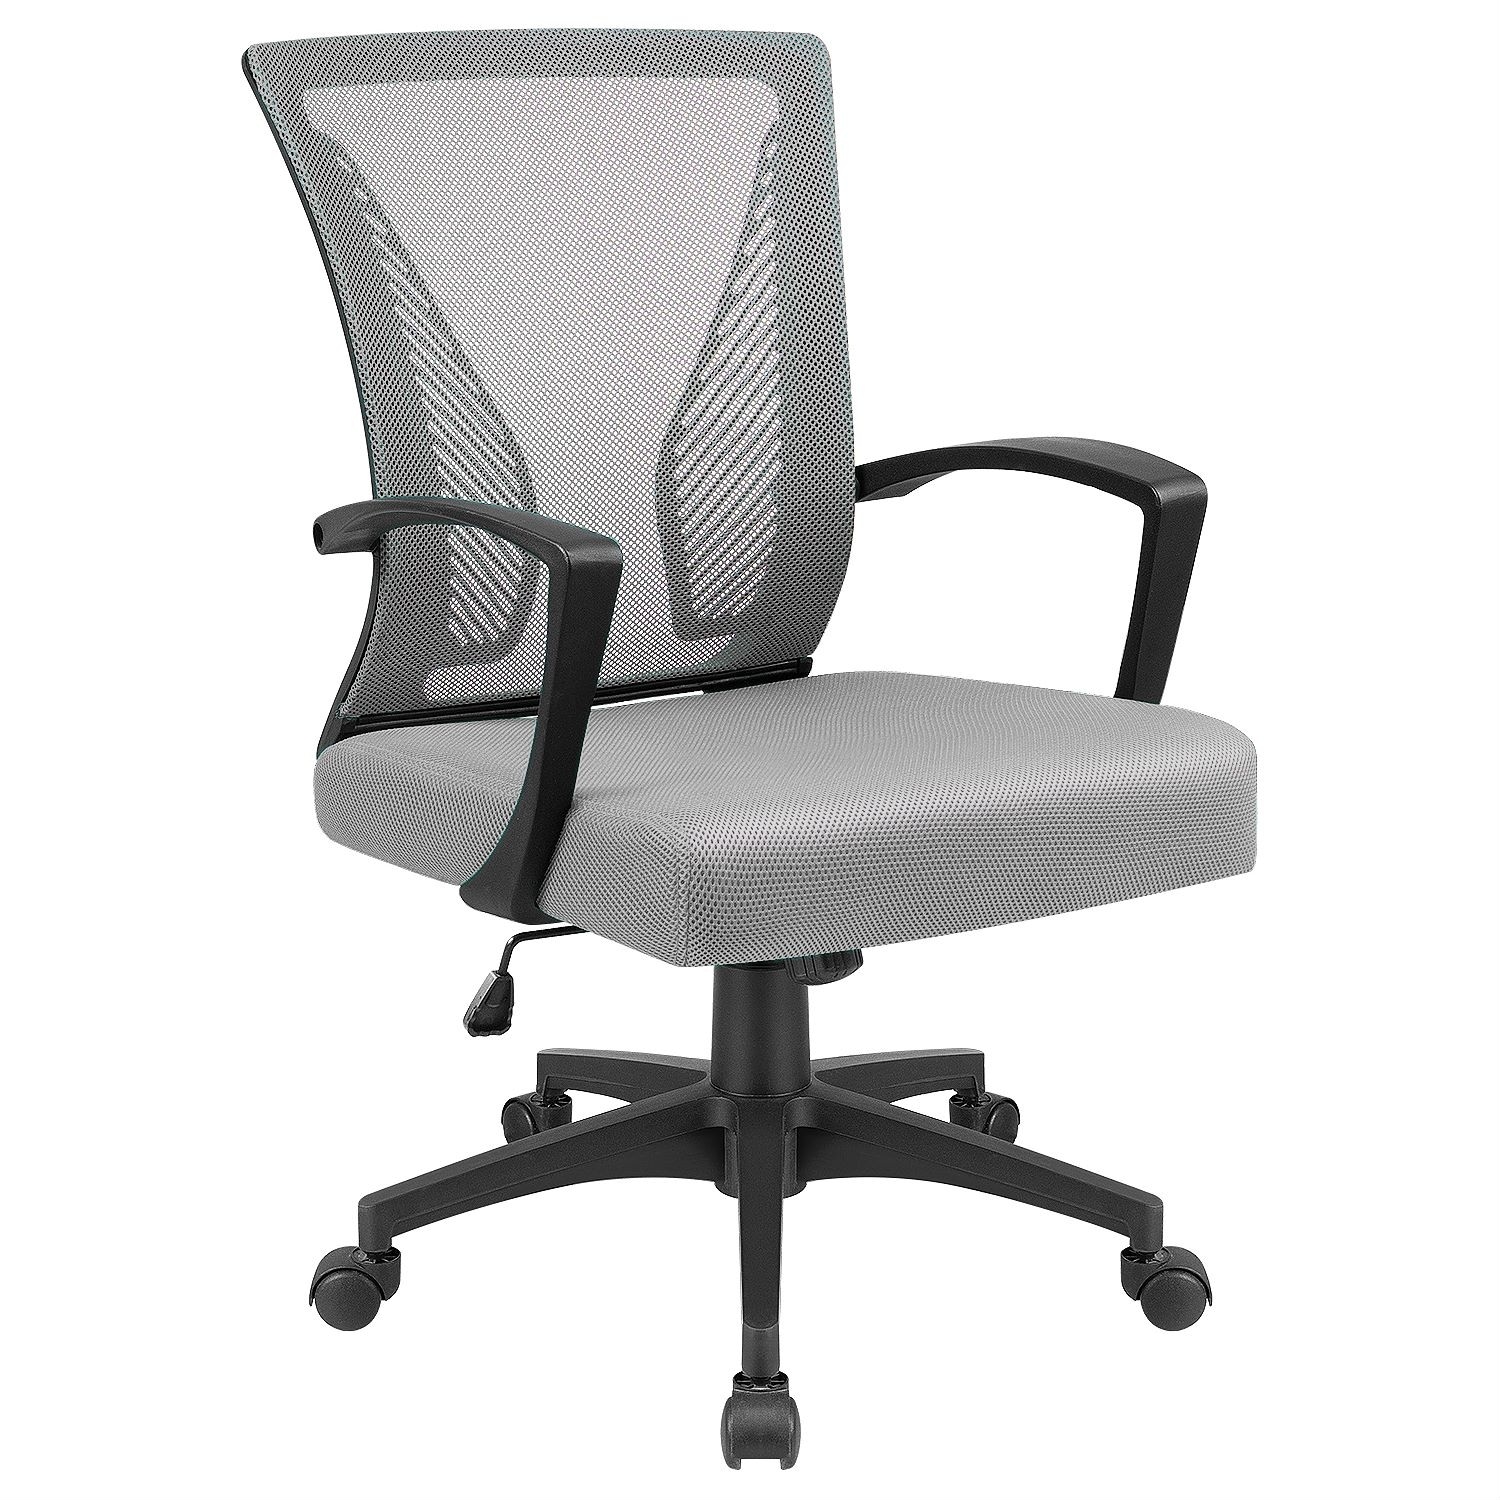 https://ak1.ostkcdn.com/images/products/is/images/direct/81b61ed205304ec10ba95f779d334dc8405b57bb/Office-Chair-Mid-Back-Swivel-Lumbar-Support-Desk-Chair%2C-Computer-Ergonomic-Mesh-Chair-with-Armrest.jpg